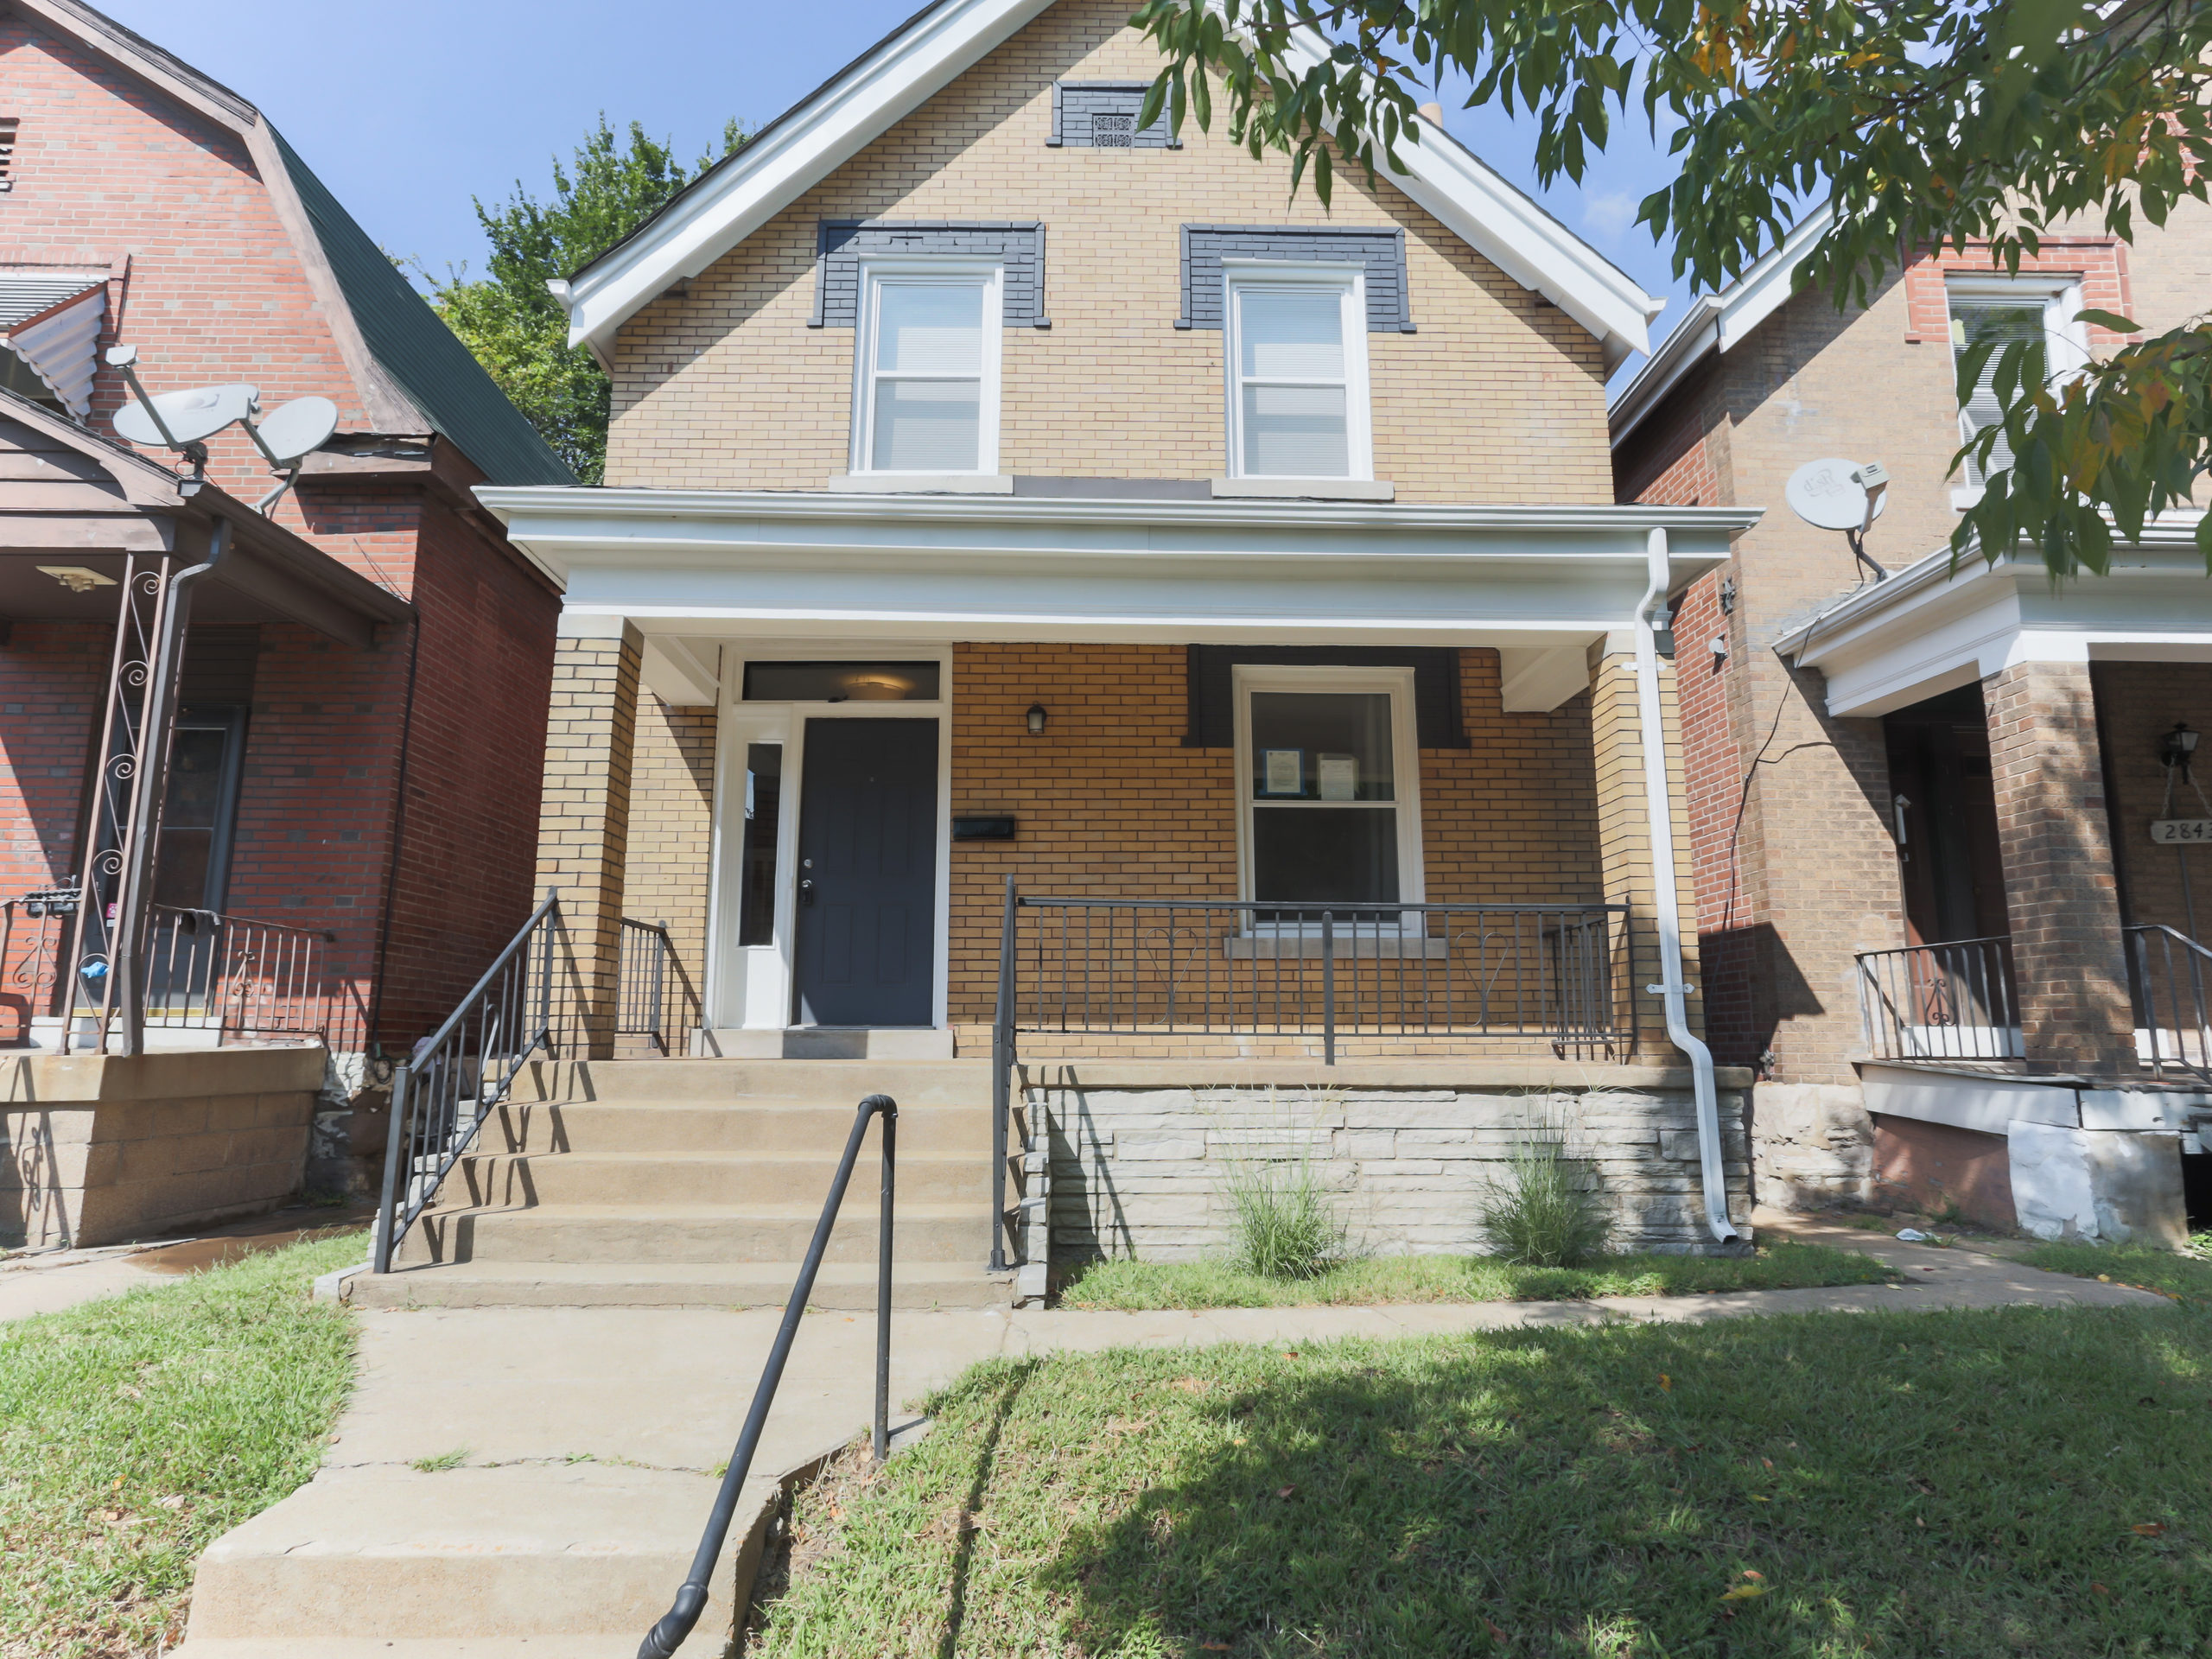 2845 Sidney St., St. Louis, MO 63104